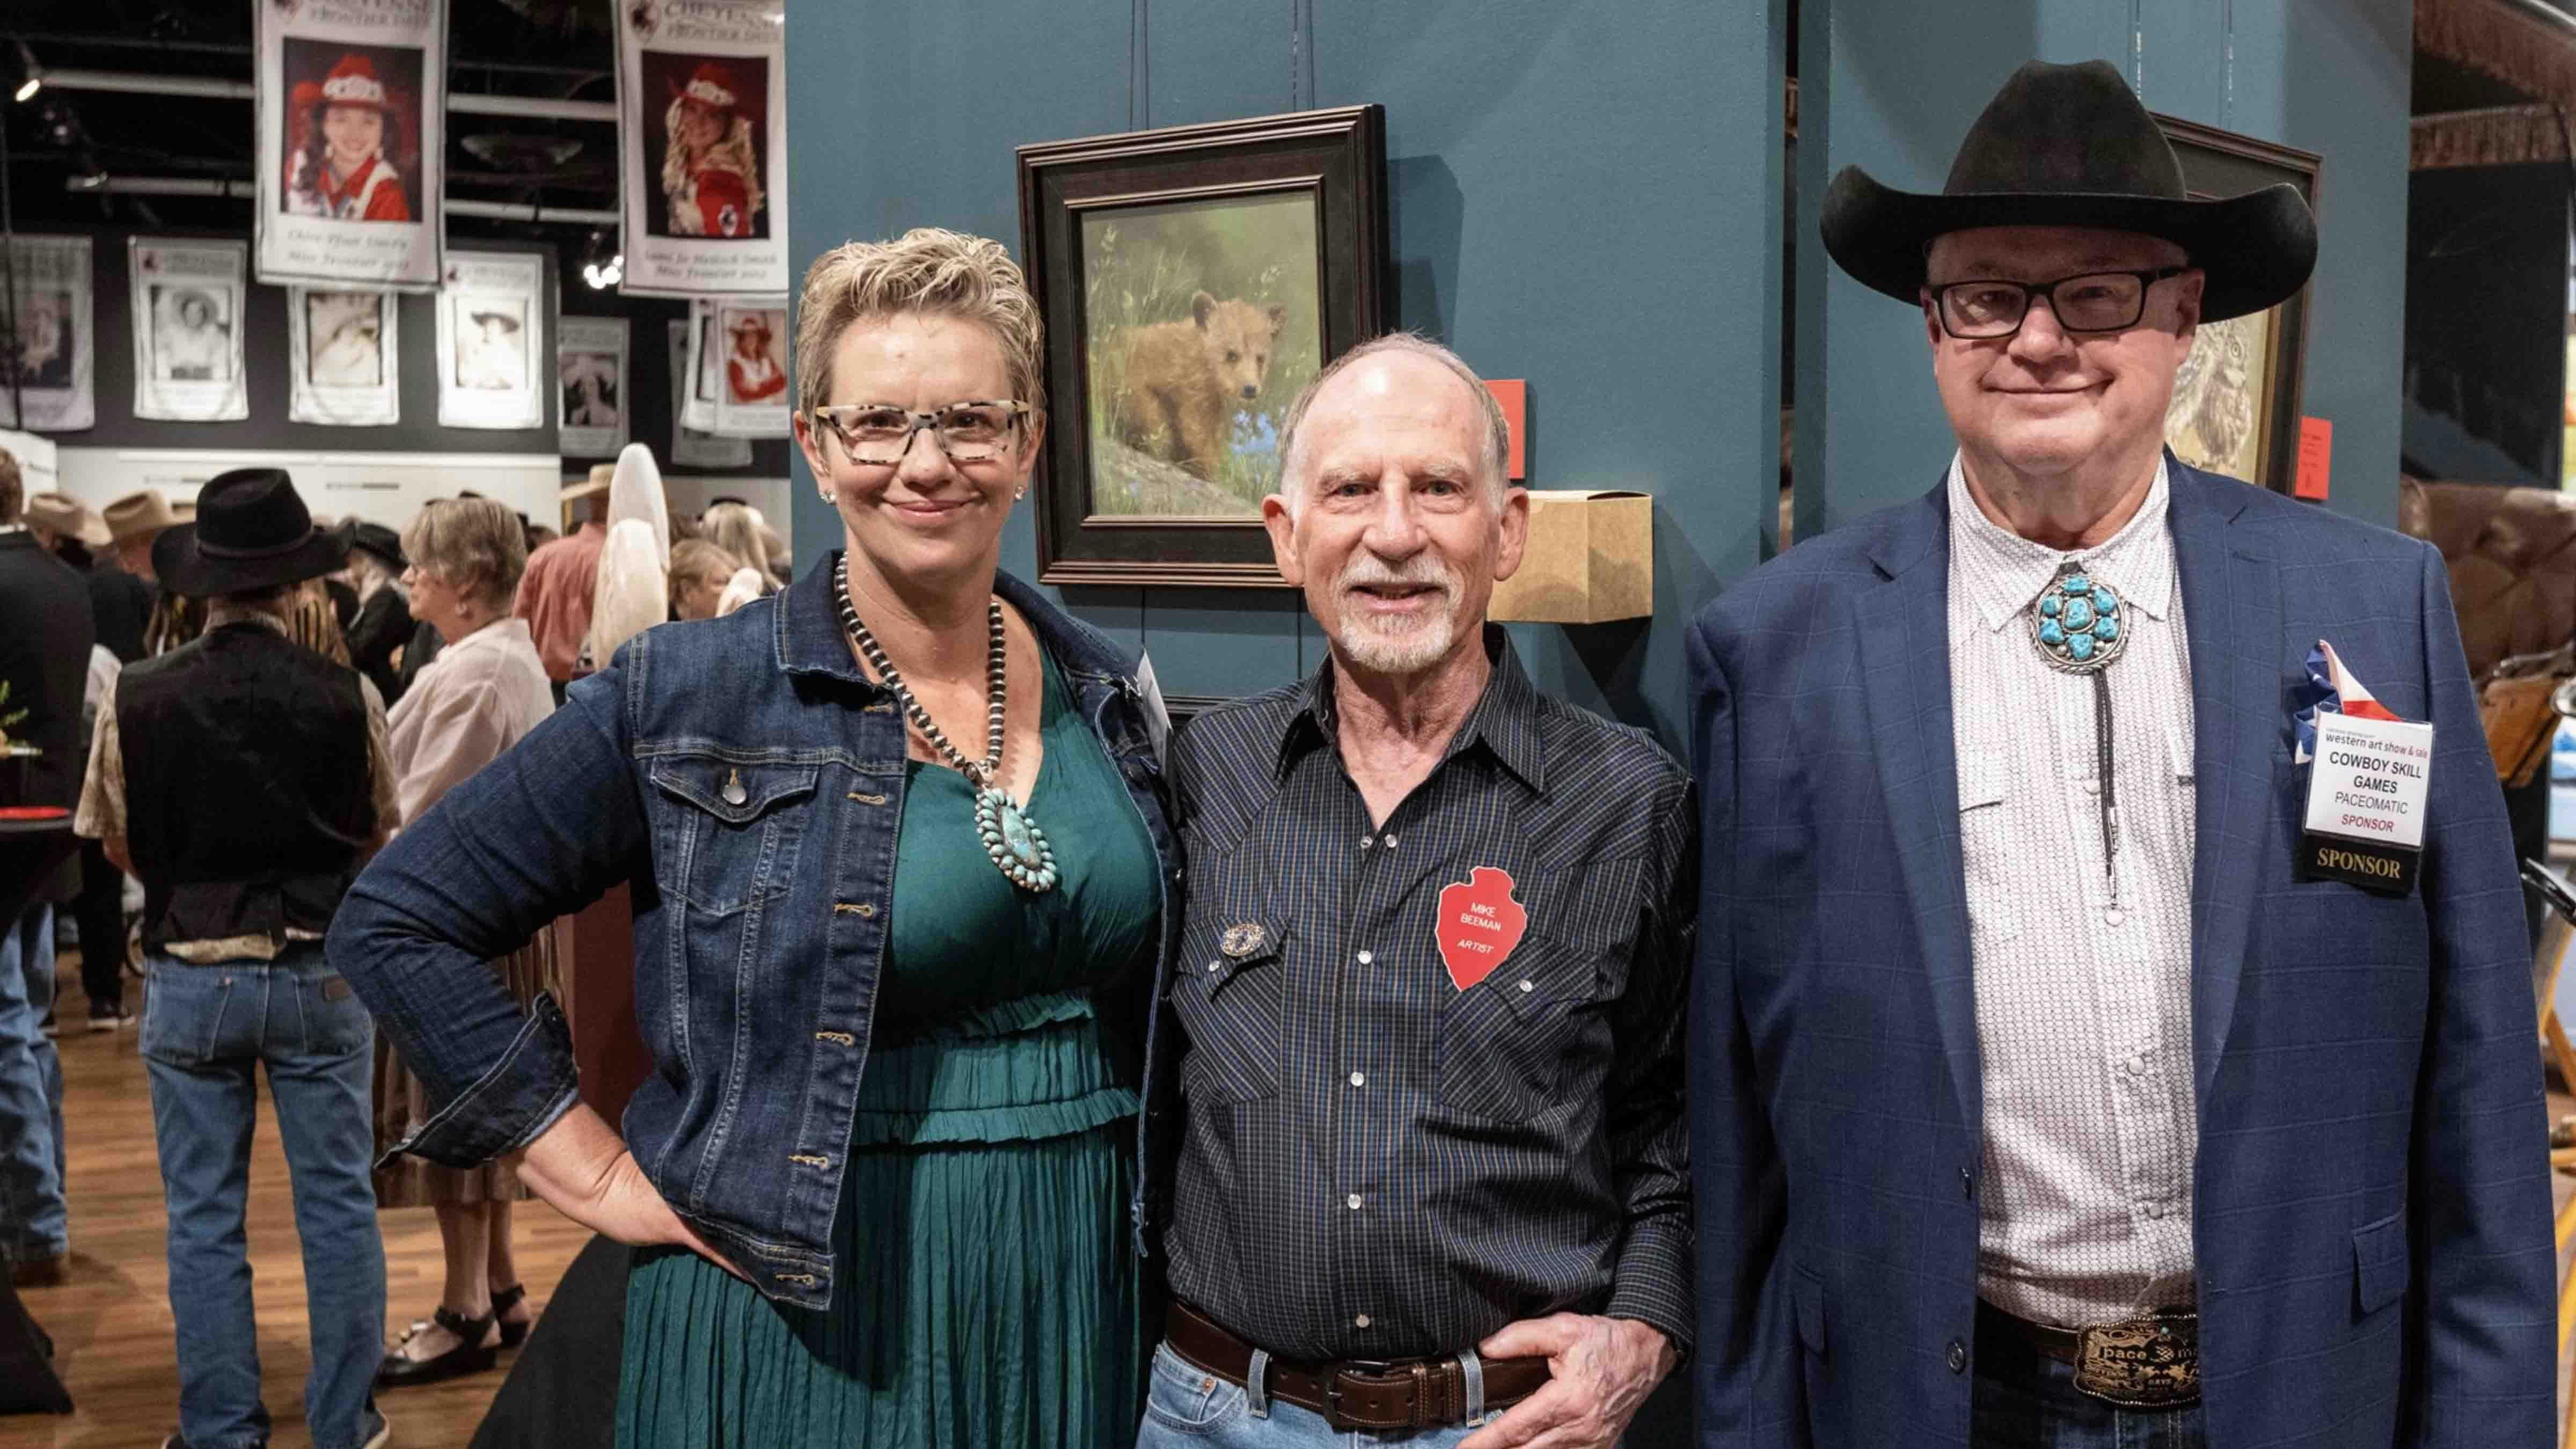 Governor's Art Show at Cheyenne Frontier Days with Michael and Karmin Pace